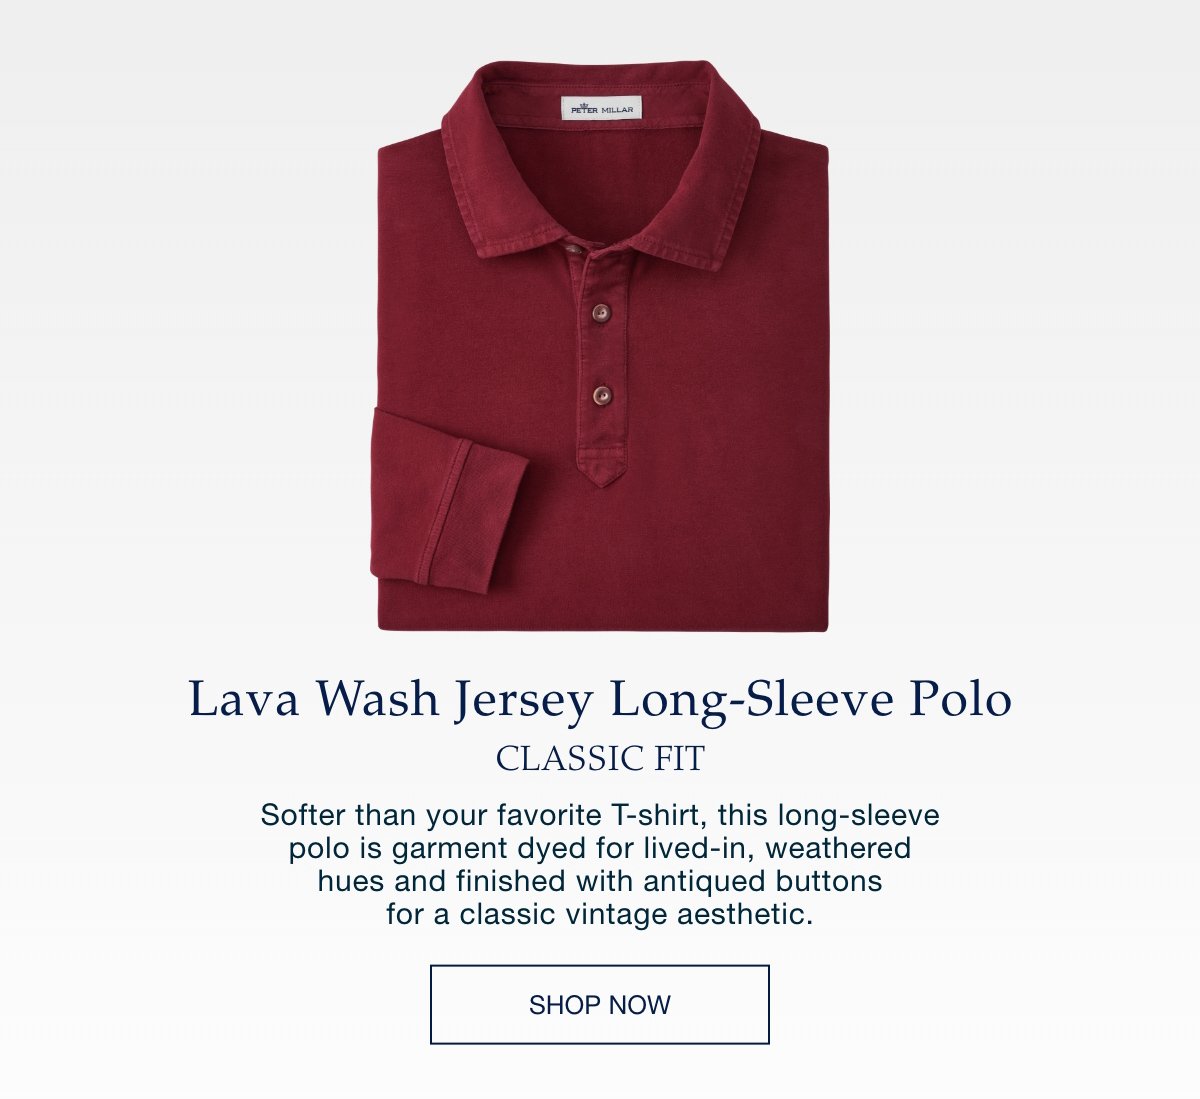 Lava Wash Jersey Long-Sleeve Polo - Shop Now